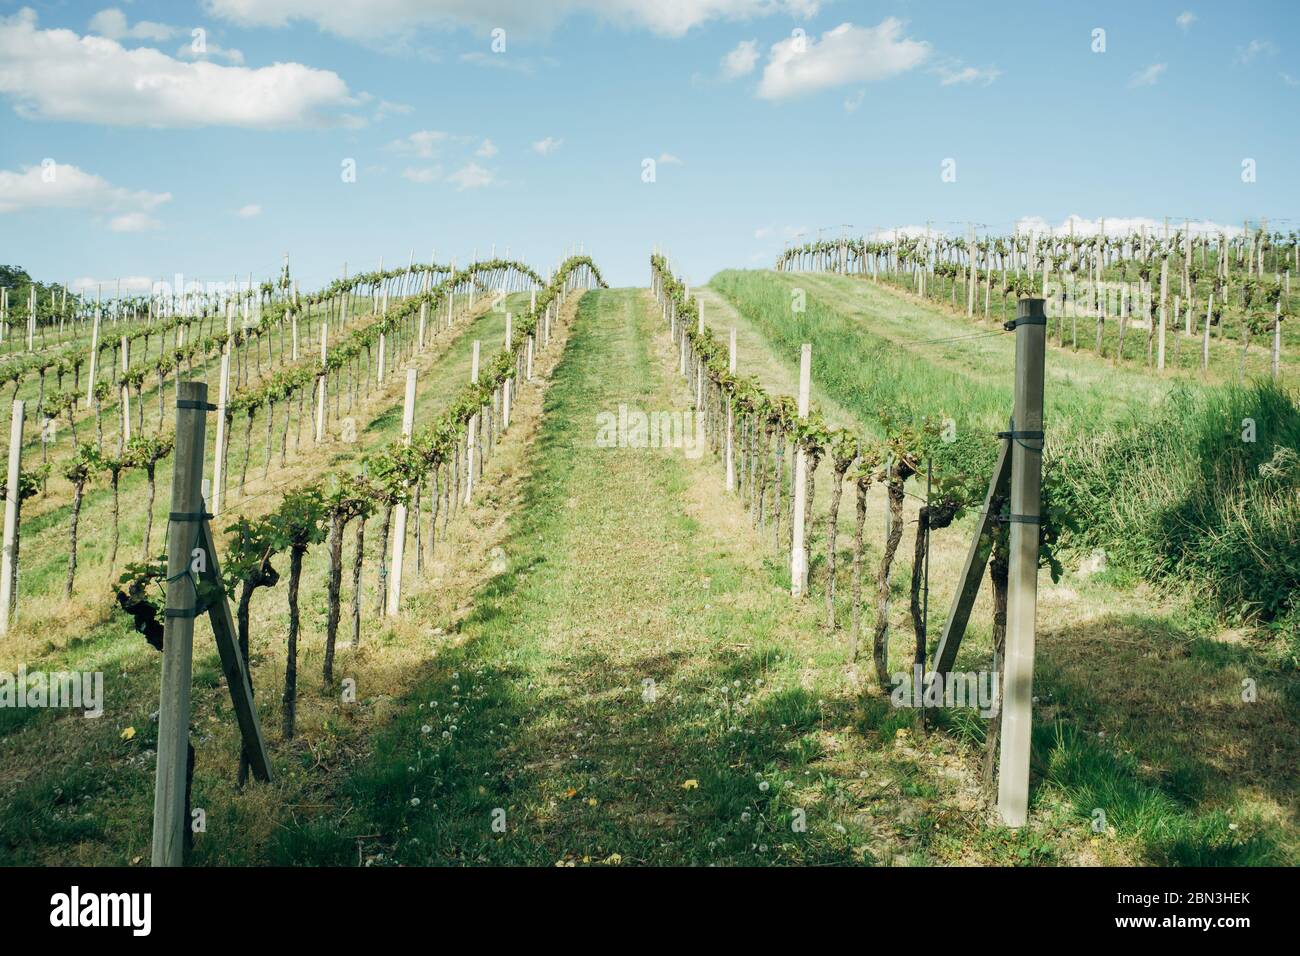 Vineyard on a hill in lower austria with blue sky and clouds Stock Photo